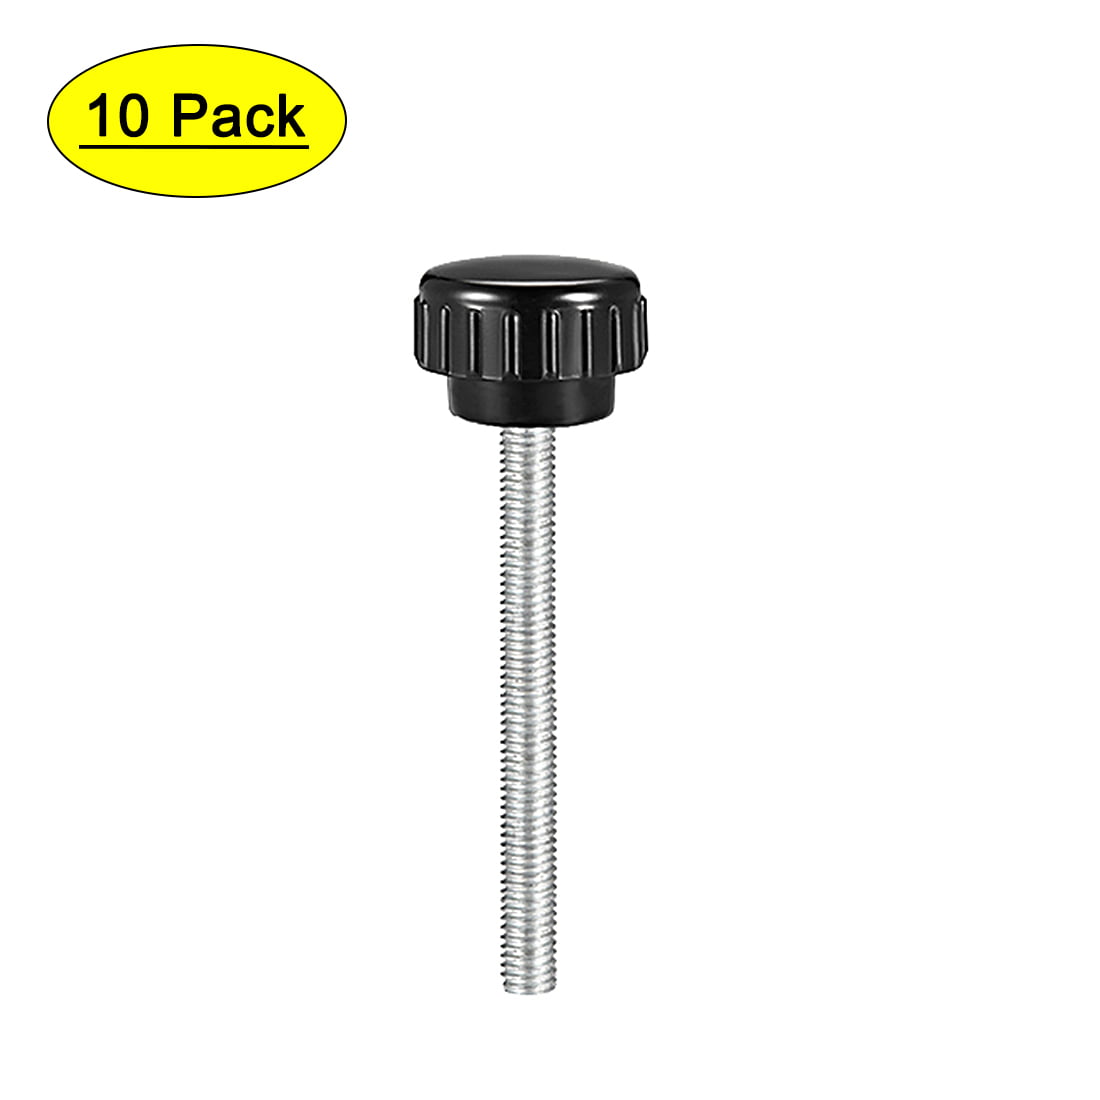 M5 x 20mm Male Thread Knurled Clamping Knobs Grip Thumb Screw on Type  3 Pcs